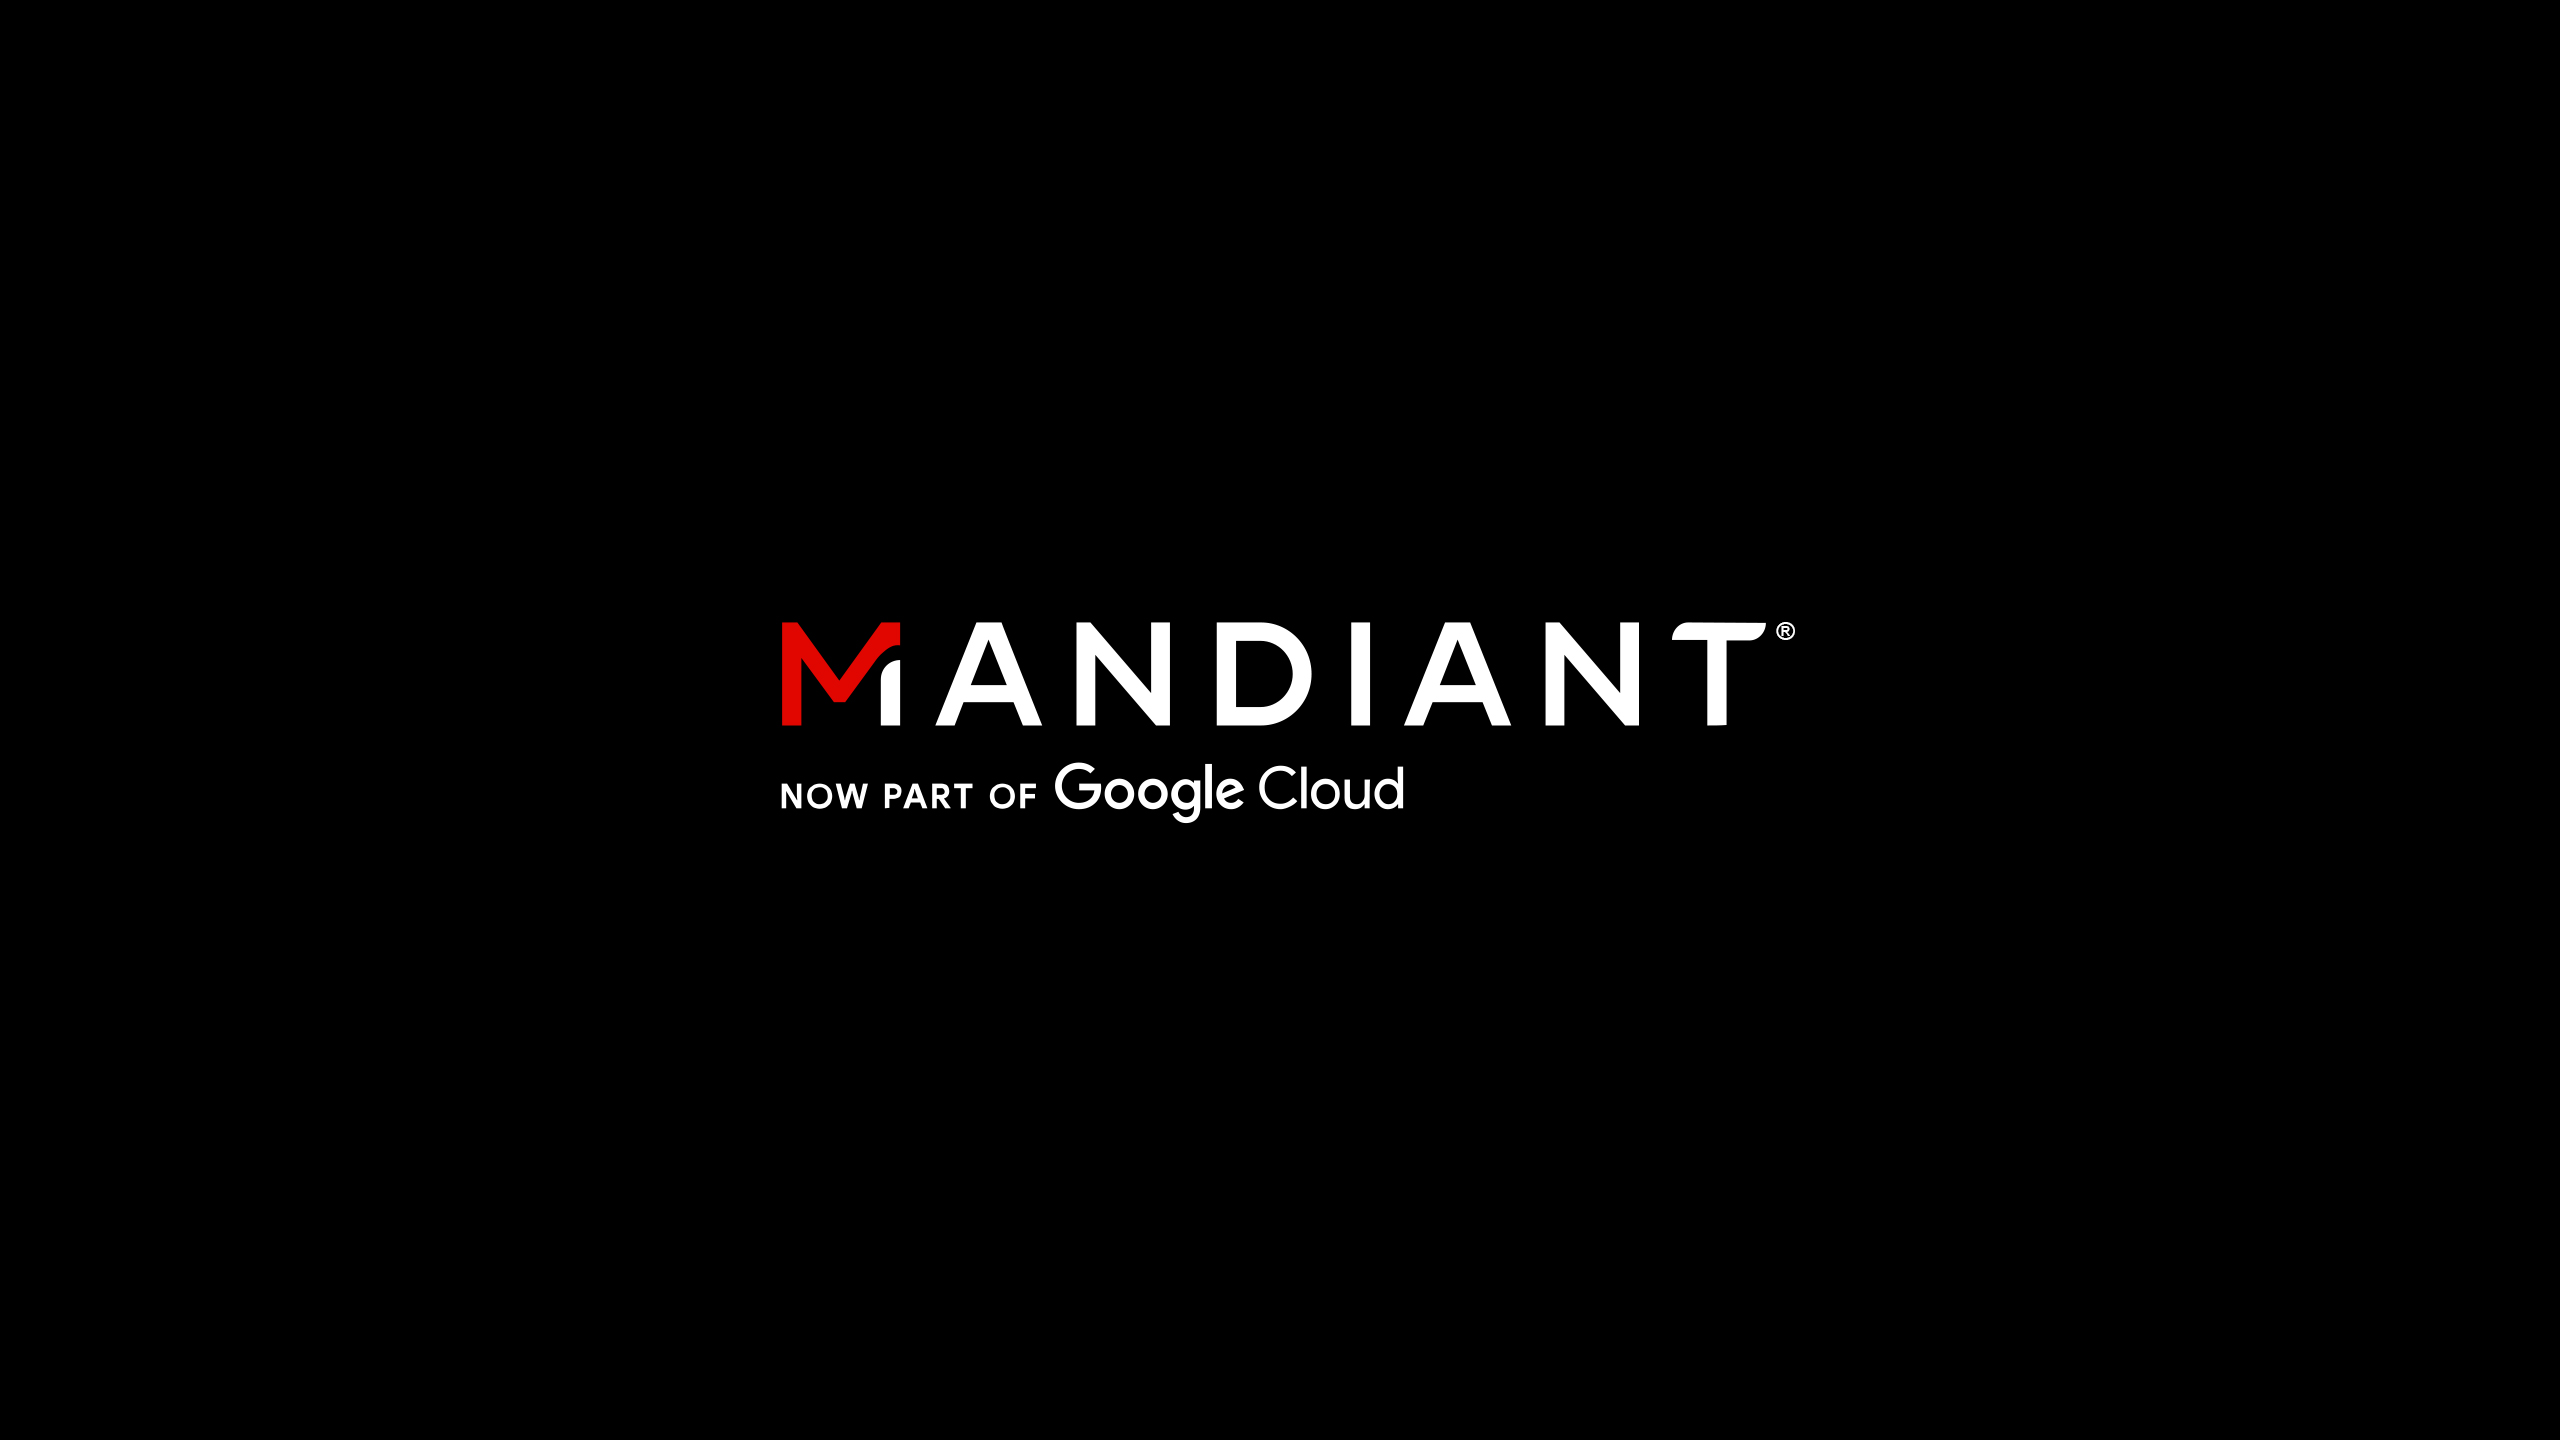 Google Completes Acquisition of Mandiant